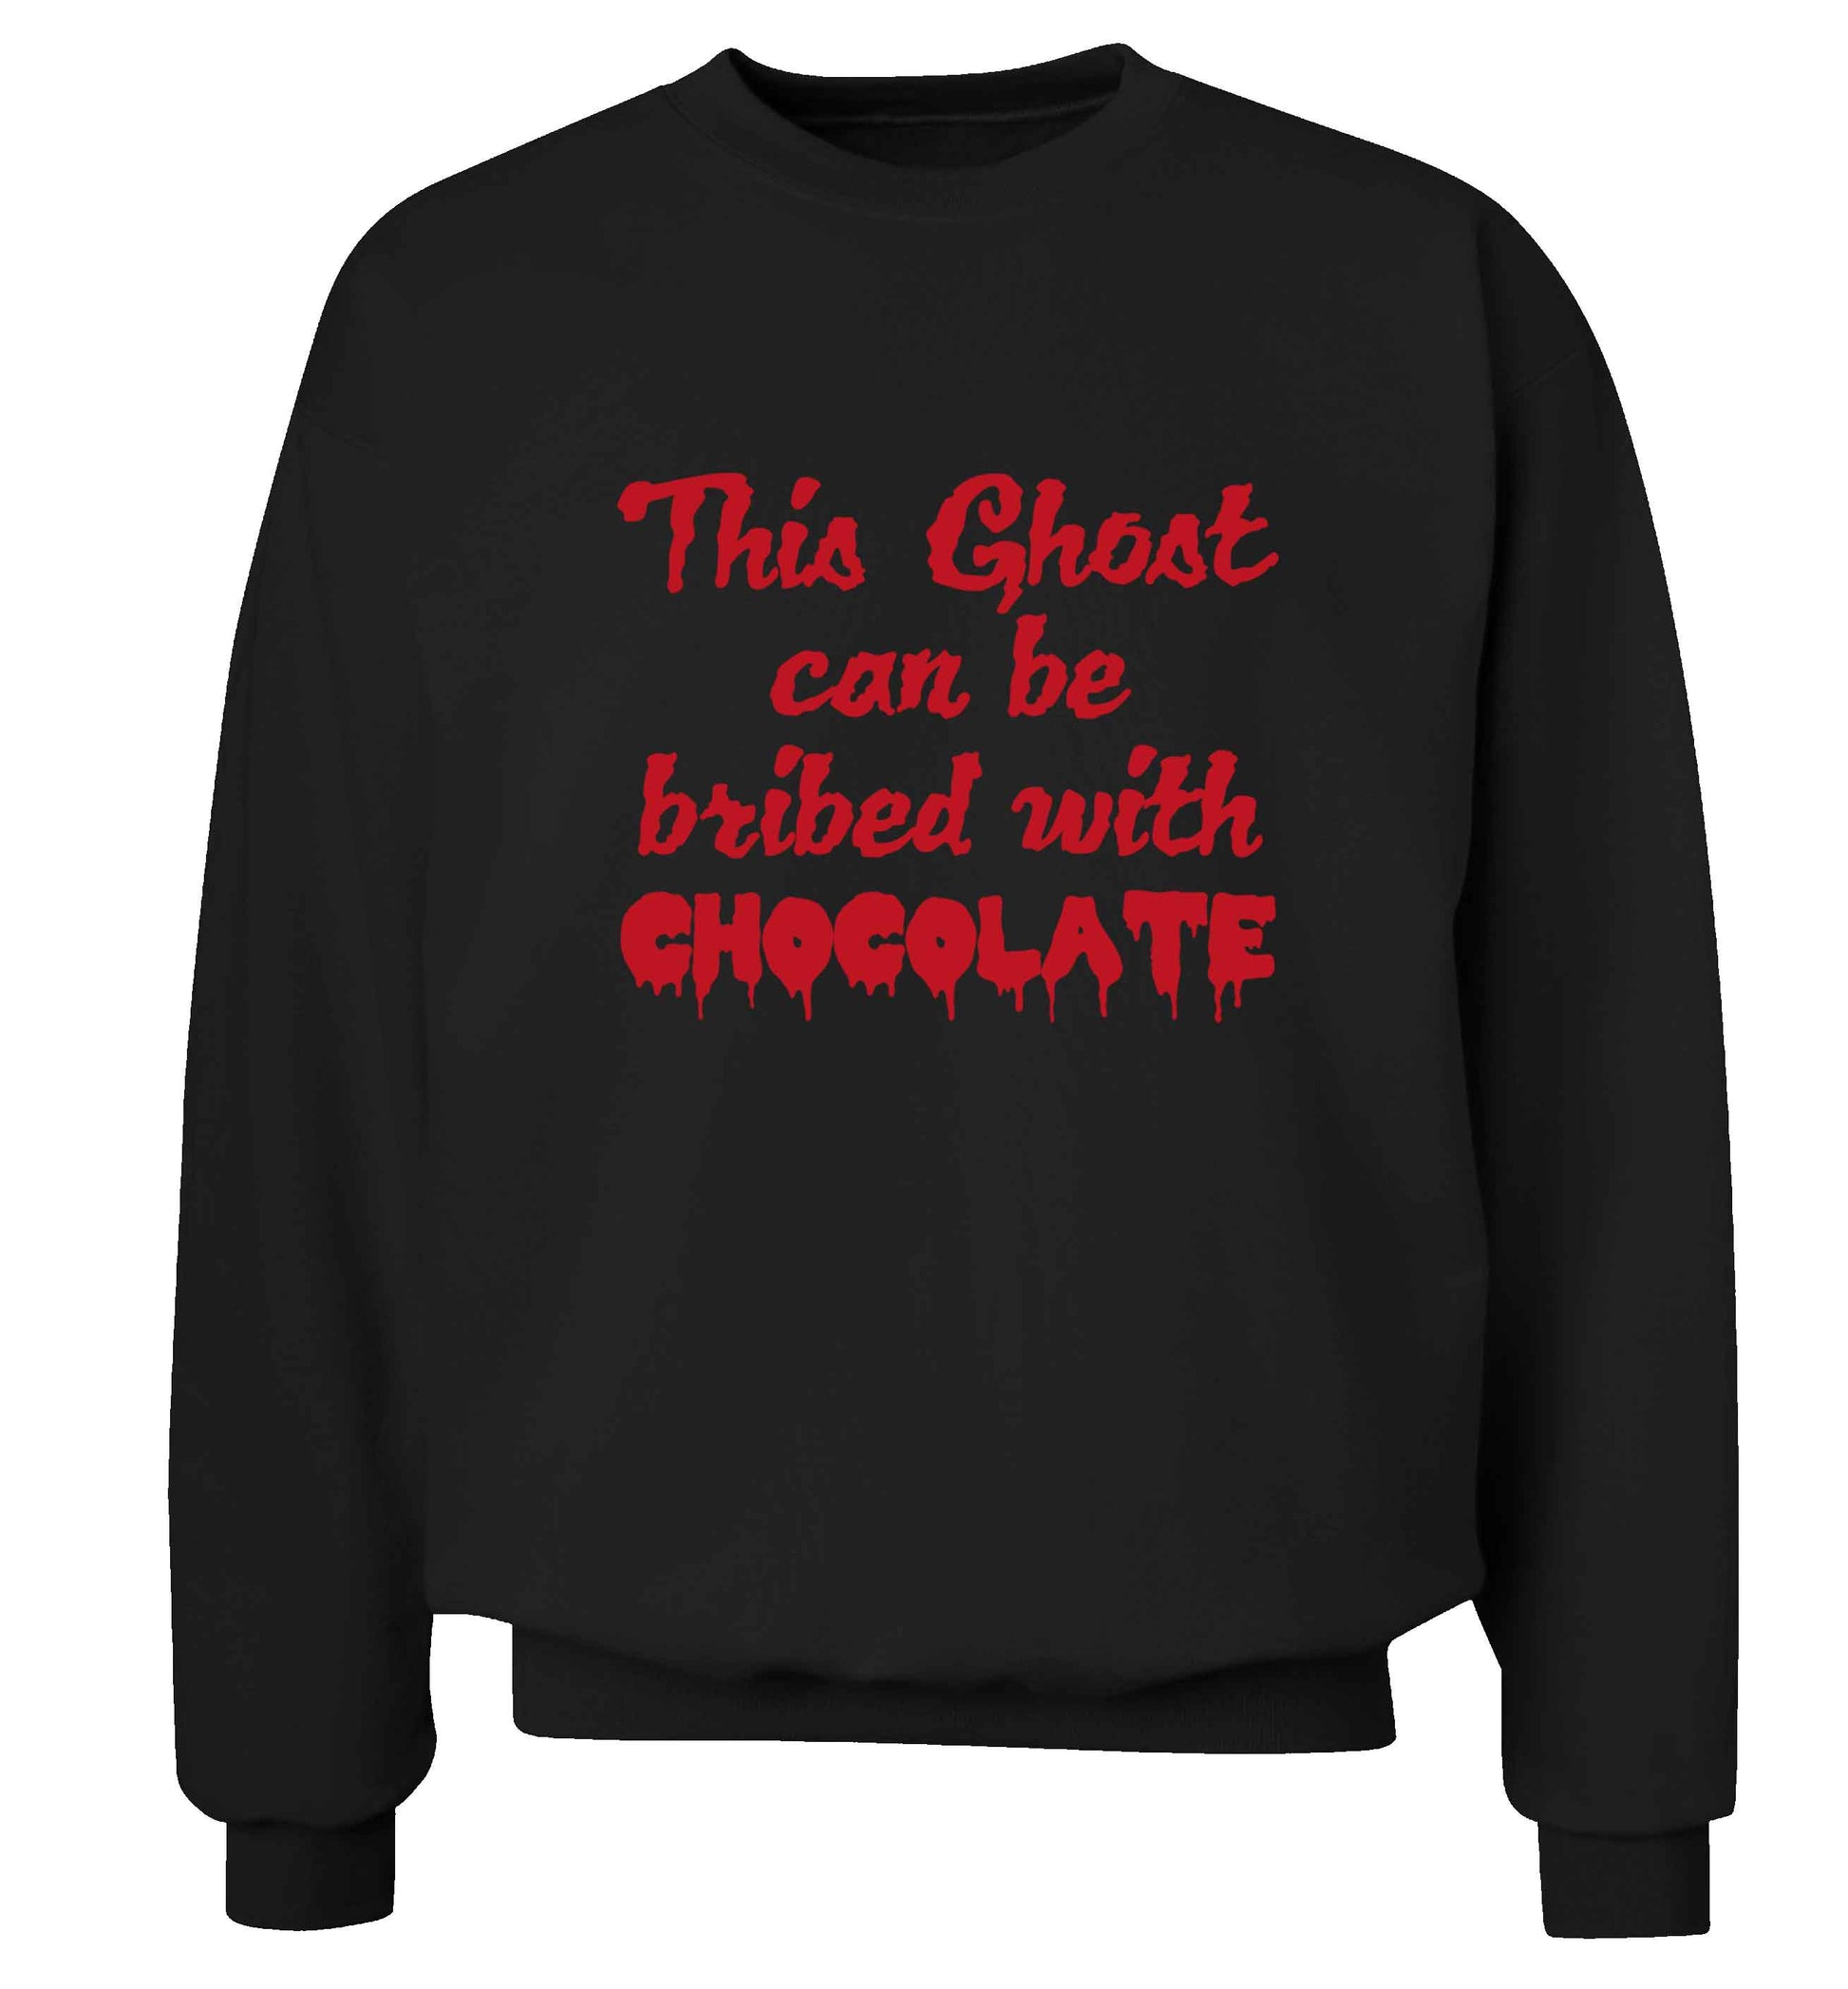 This ghost can be bribed with chocolate adult's unisex black sweater 2XL